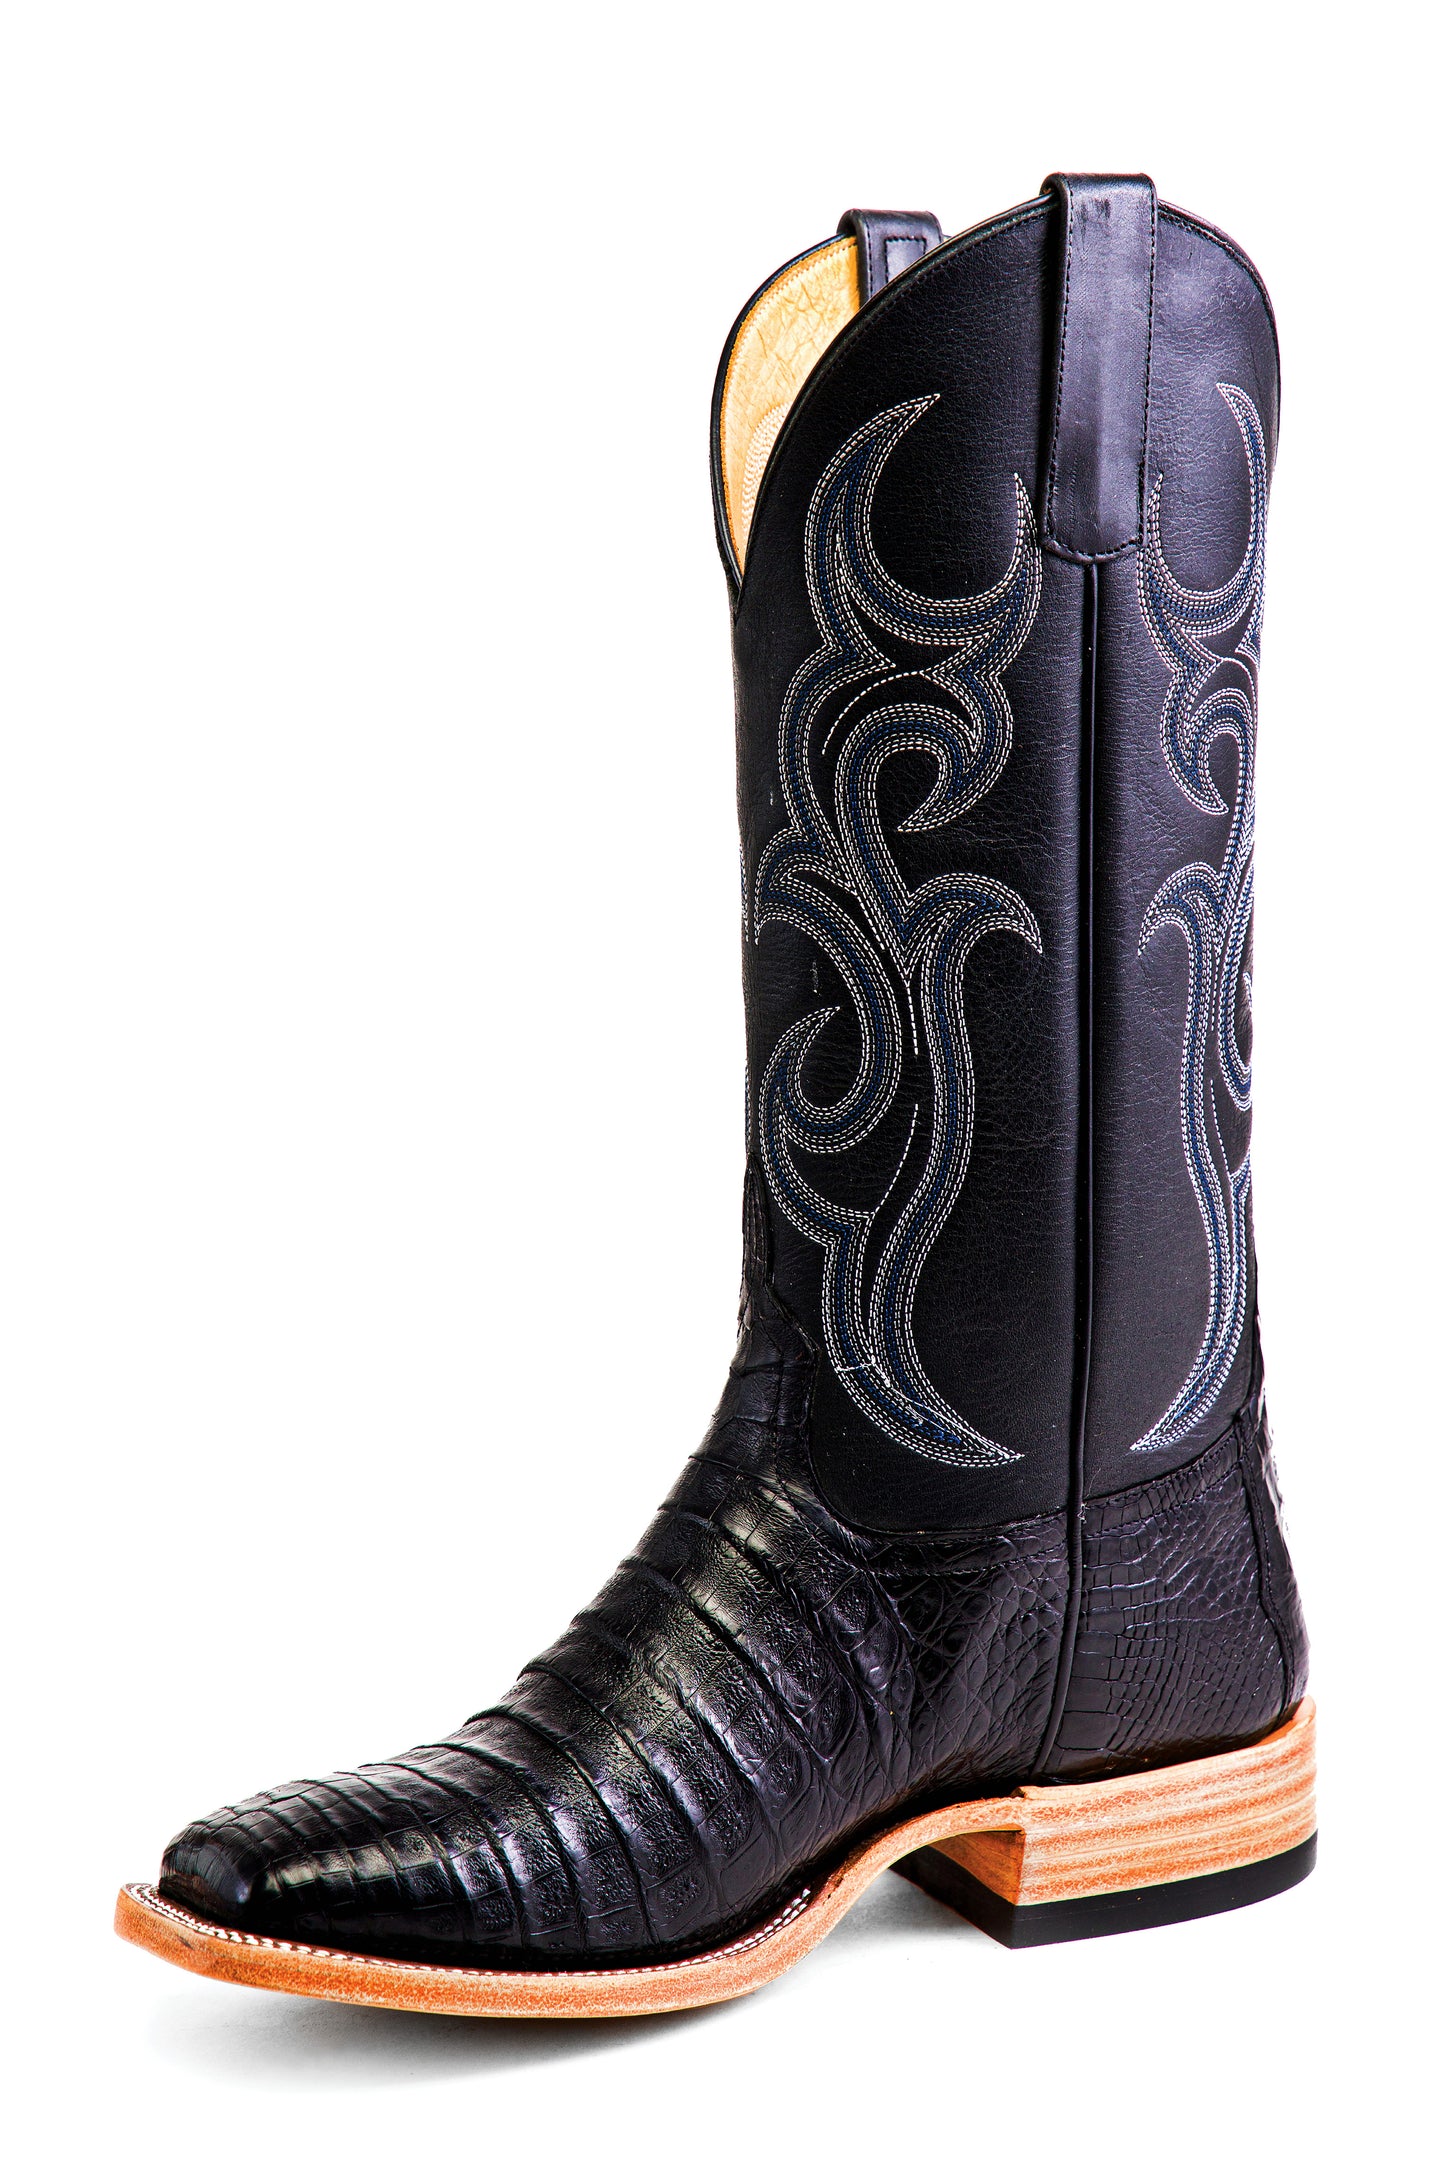 HORSE POWER TOP HAND COLLECTION BLACK CAIMAN BELLY SQUARE TOE BOOT